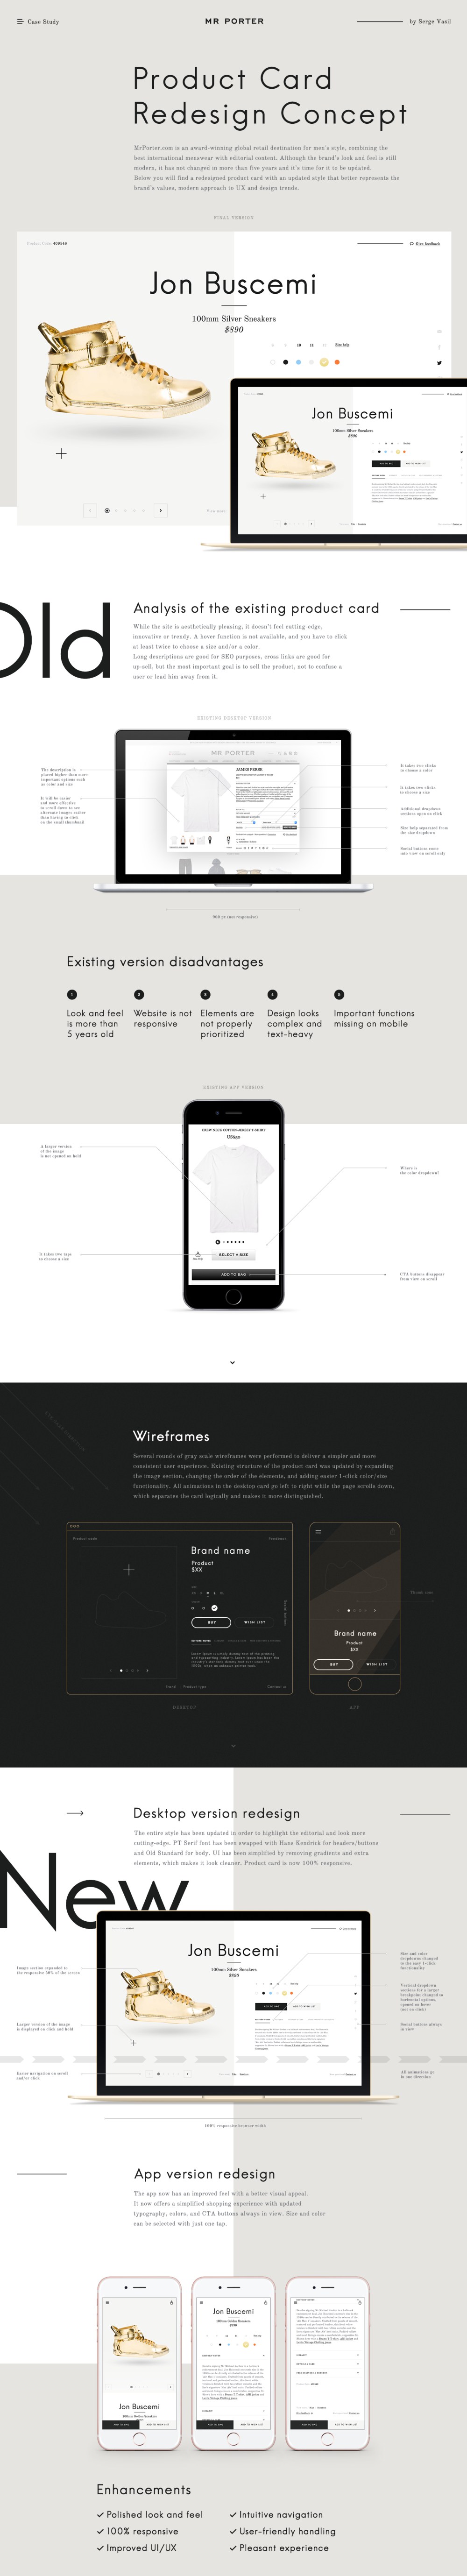 Mr Porter — Product Card Redesign